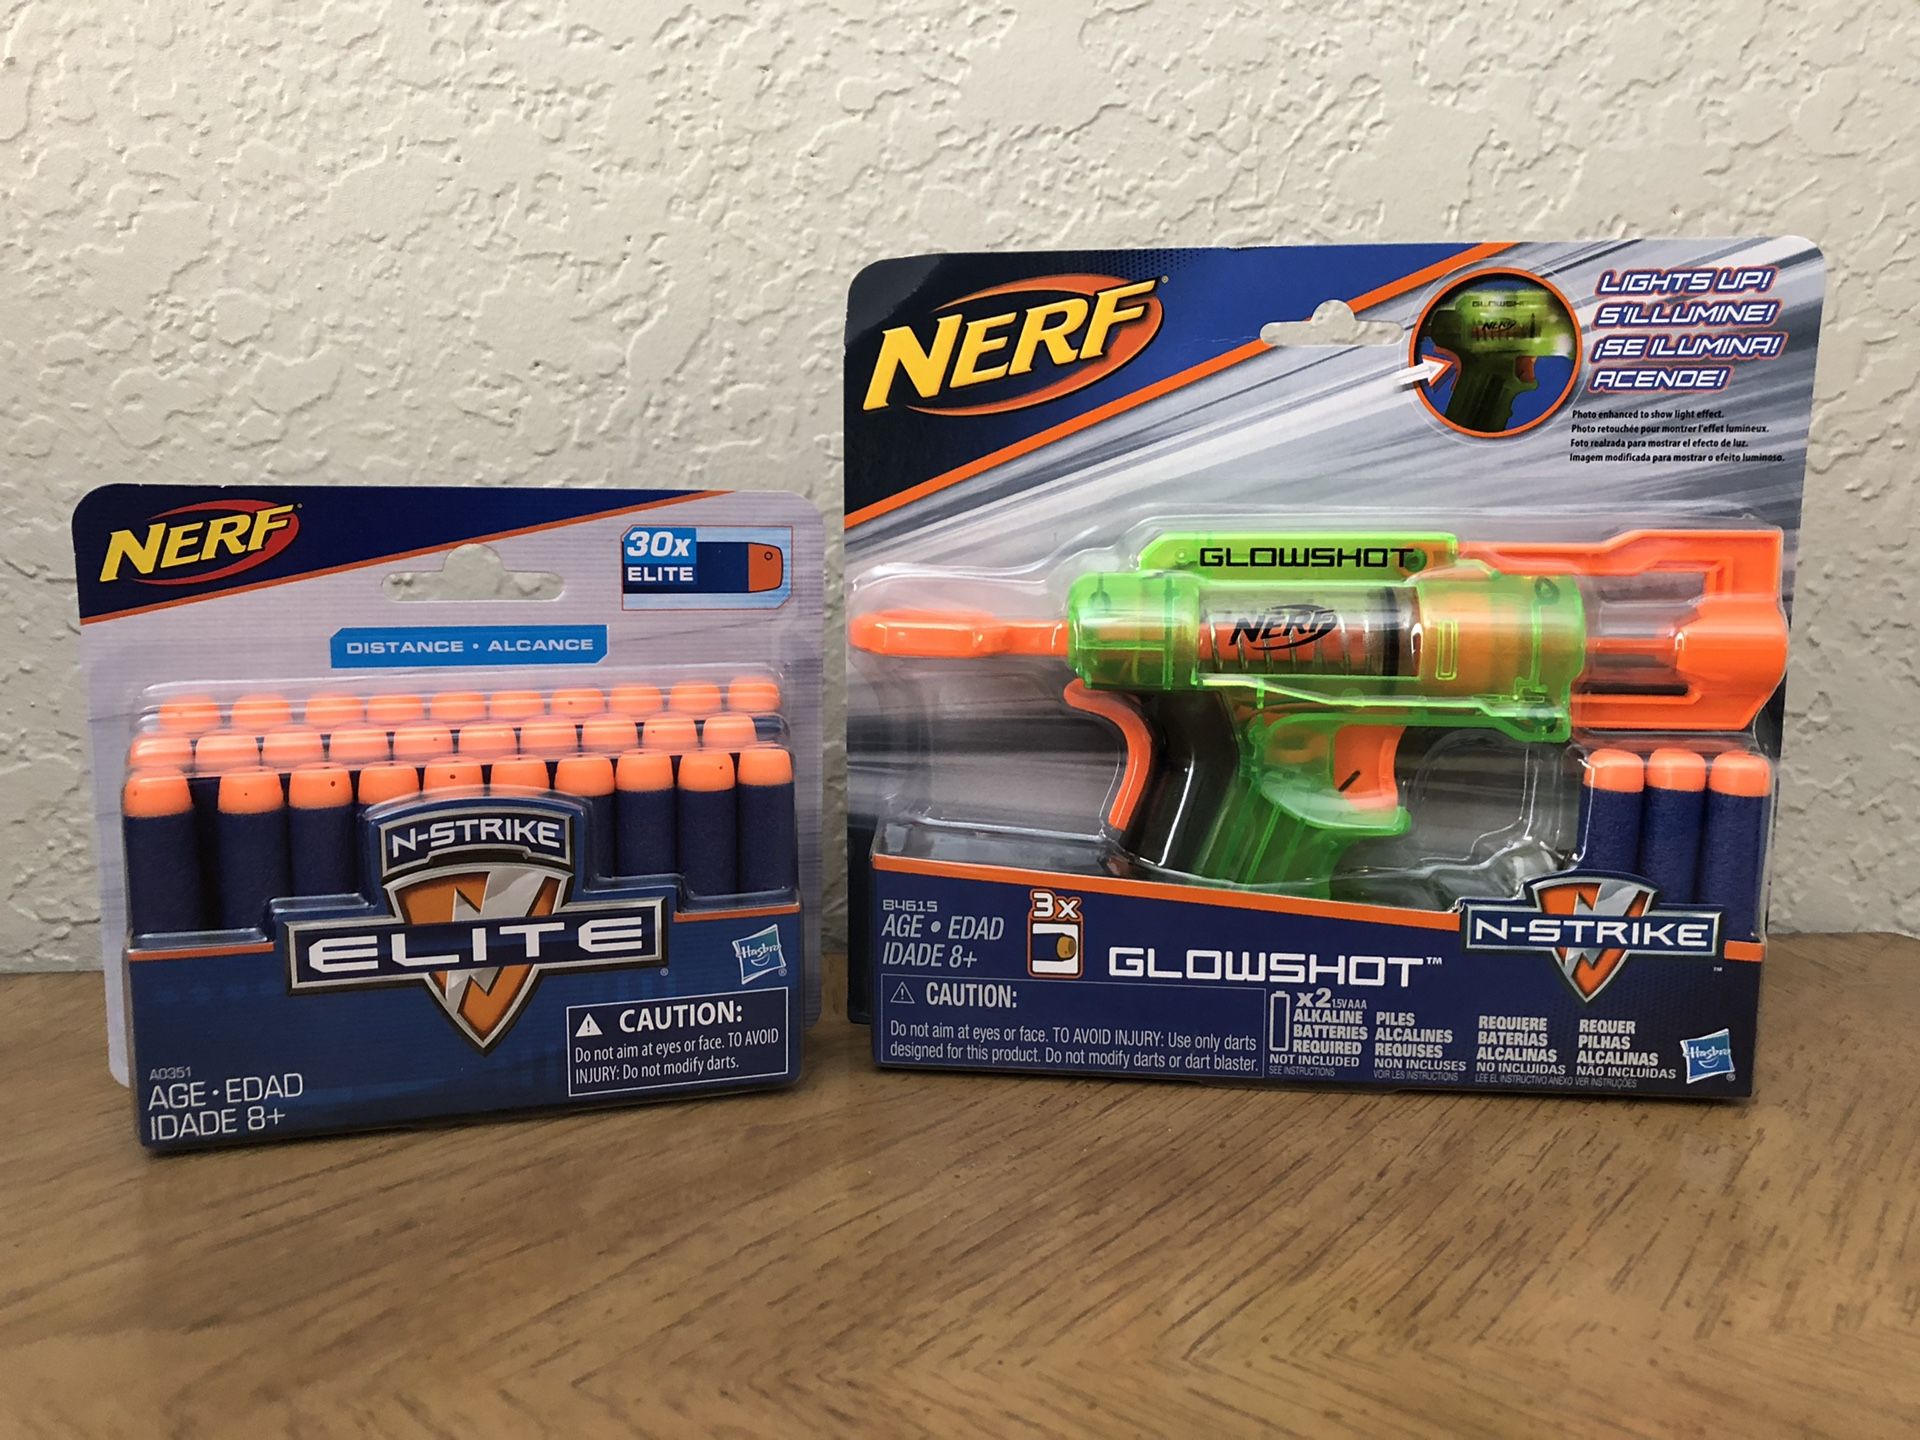 Nerf Glowshot with 30 Refill Pack $10